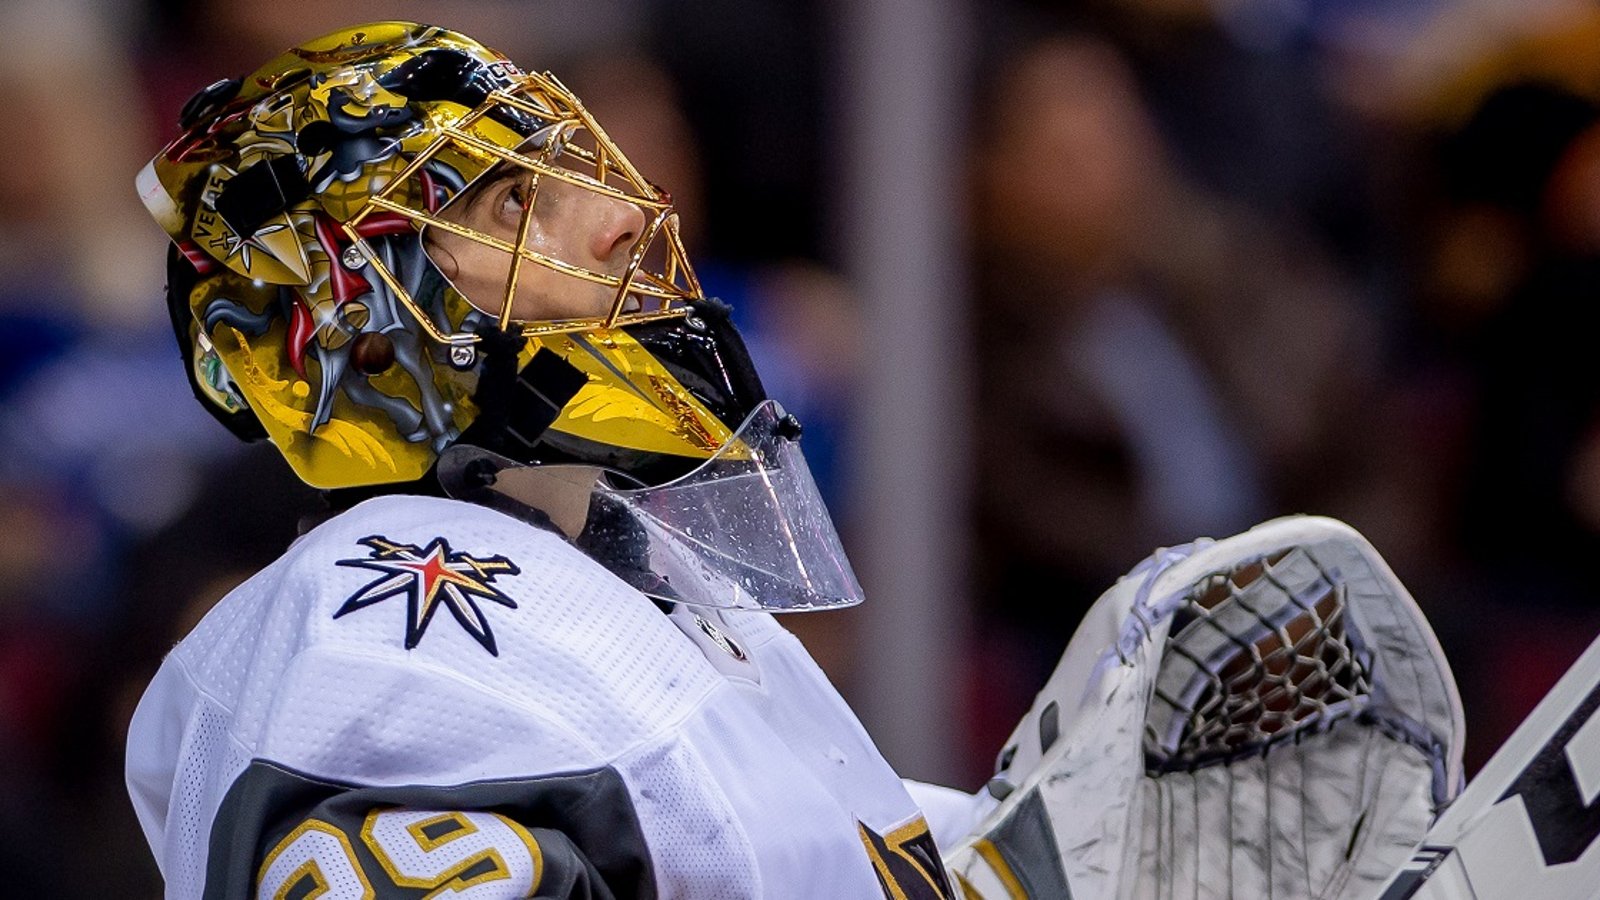 Marc Andre Fleury has been pulled from tonight's game.